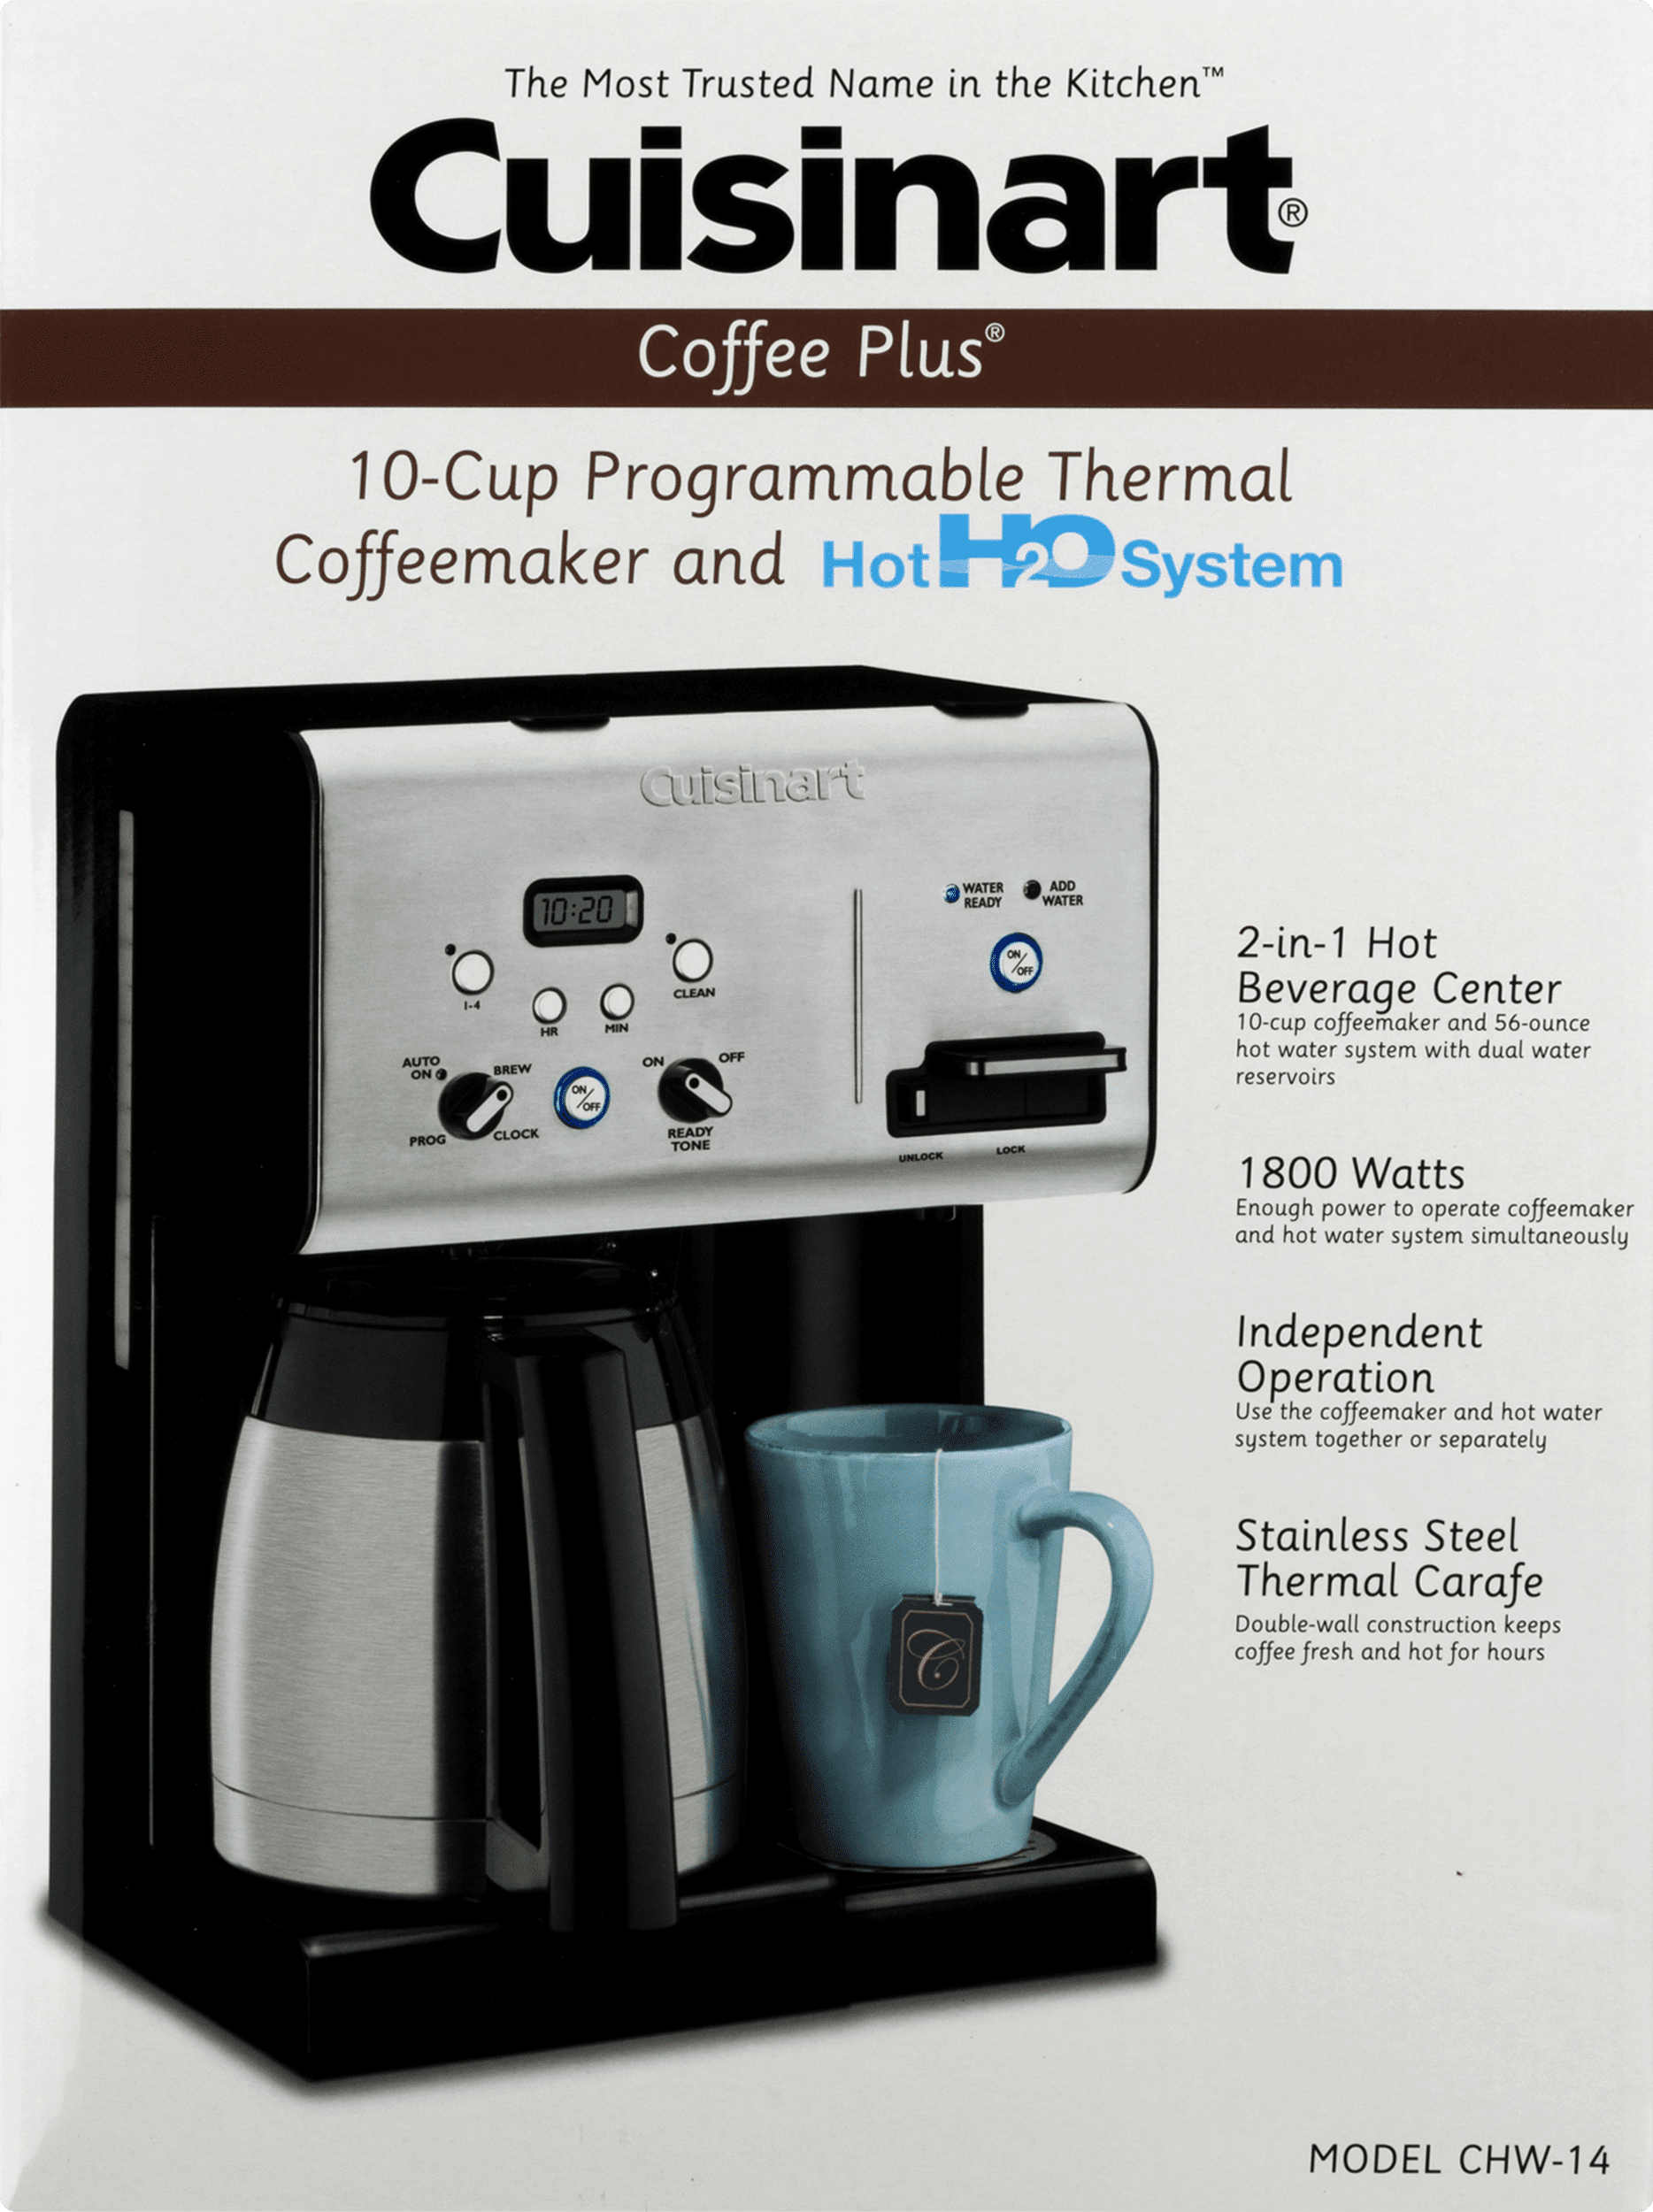 Cuisinart CHW-14 Coffee Plus 10-Cup Thermal Programmable Coffeemaker and Hot Water System 